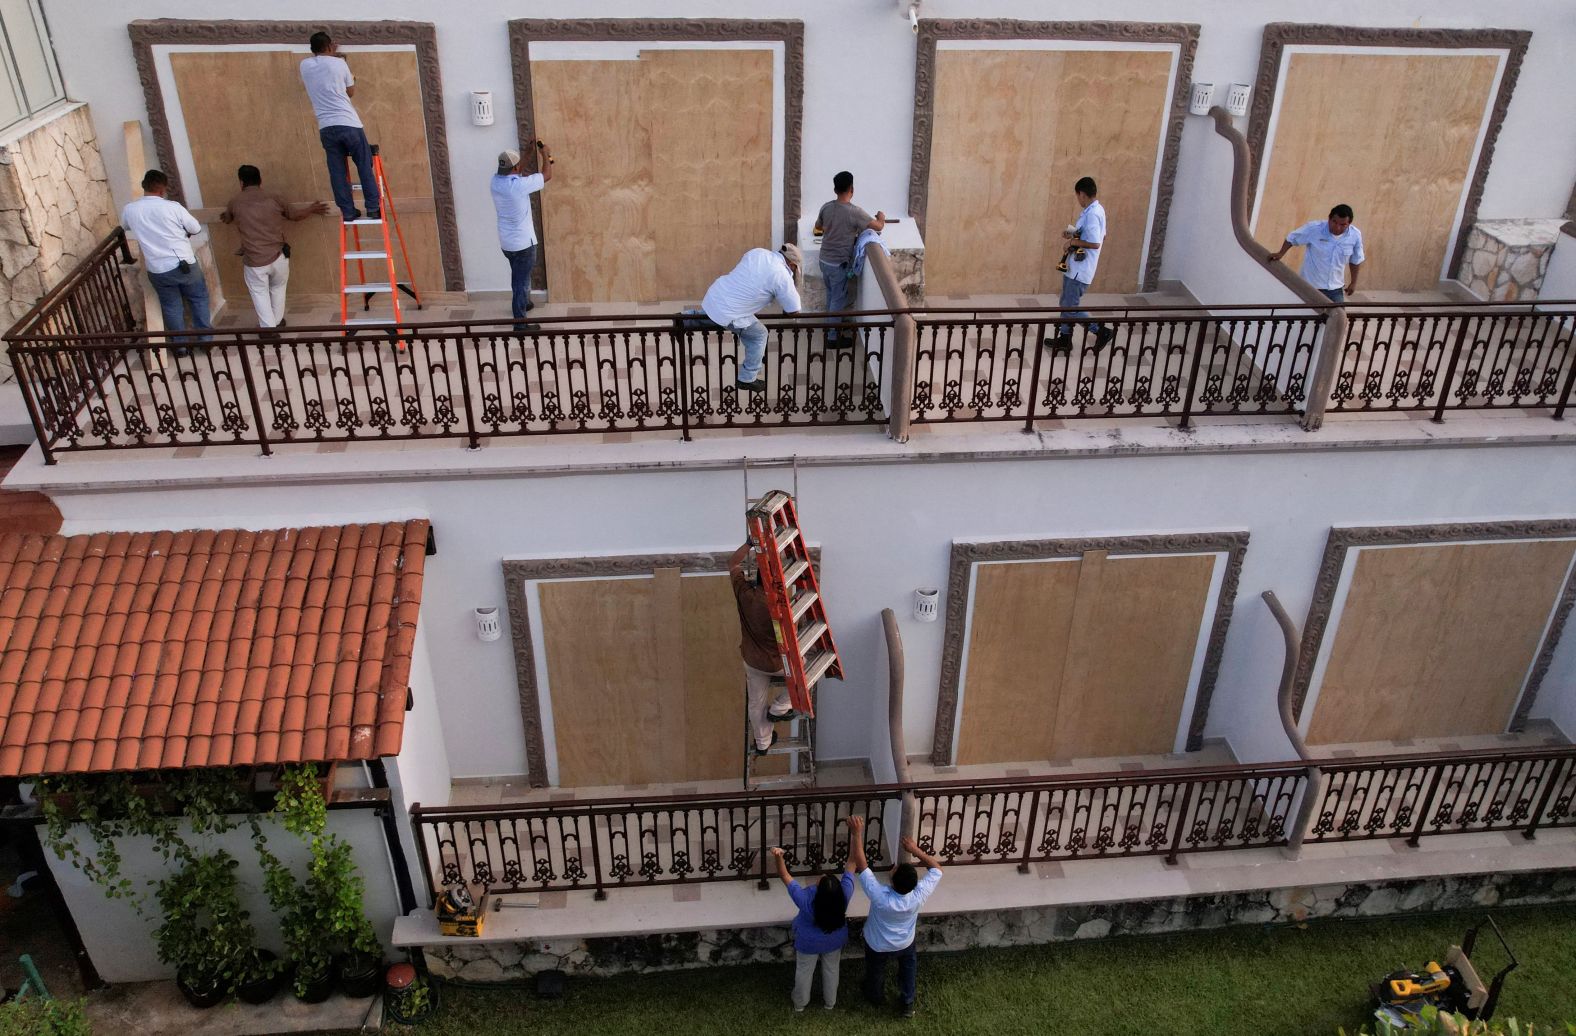 Workers install wood panels to cover glass doors at a hotel in Playa del Carmen, Mexico, on Wednesday.